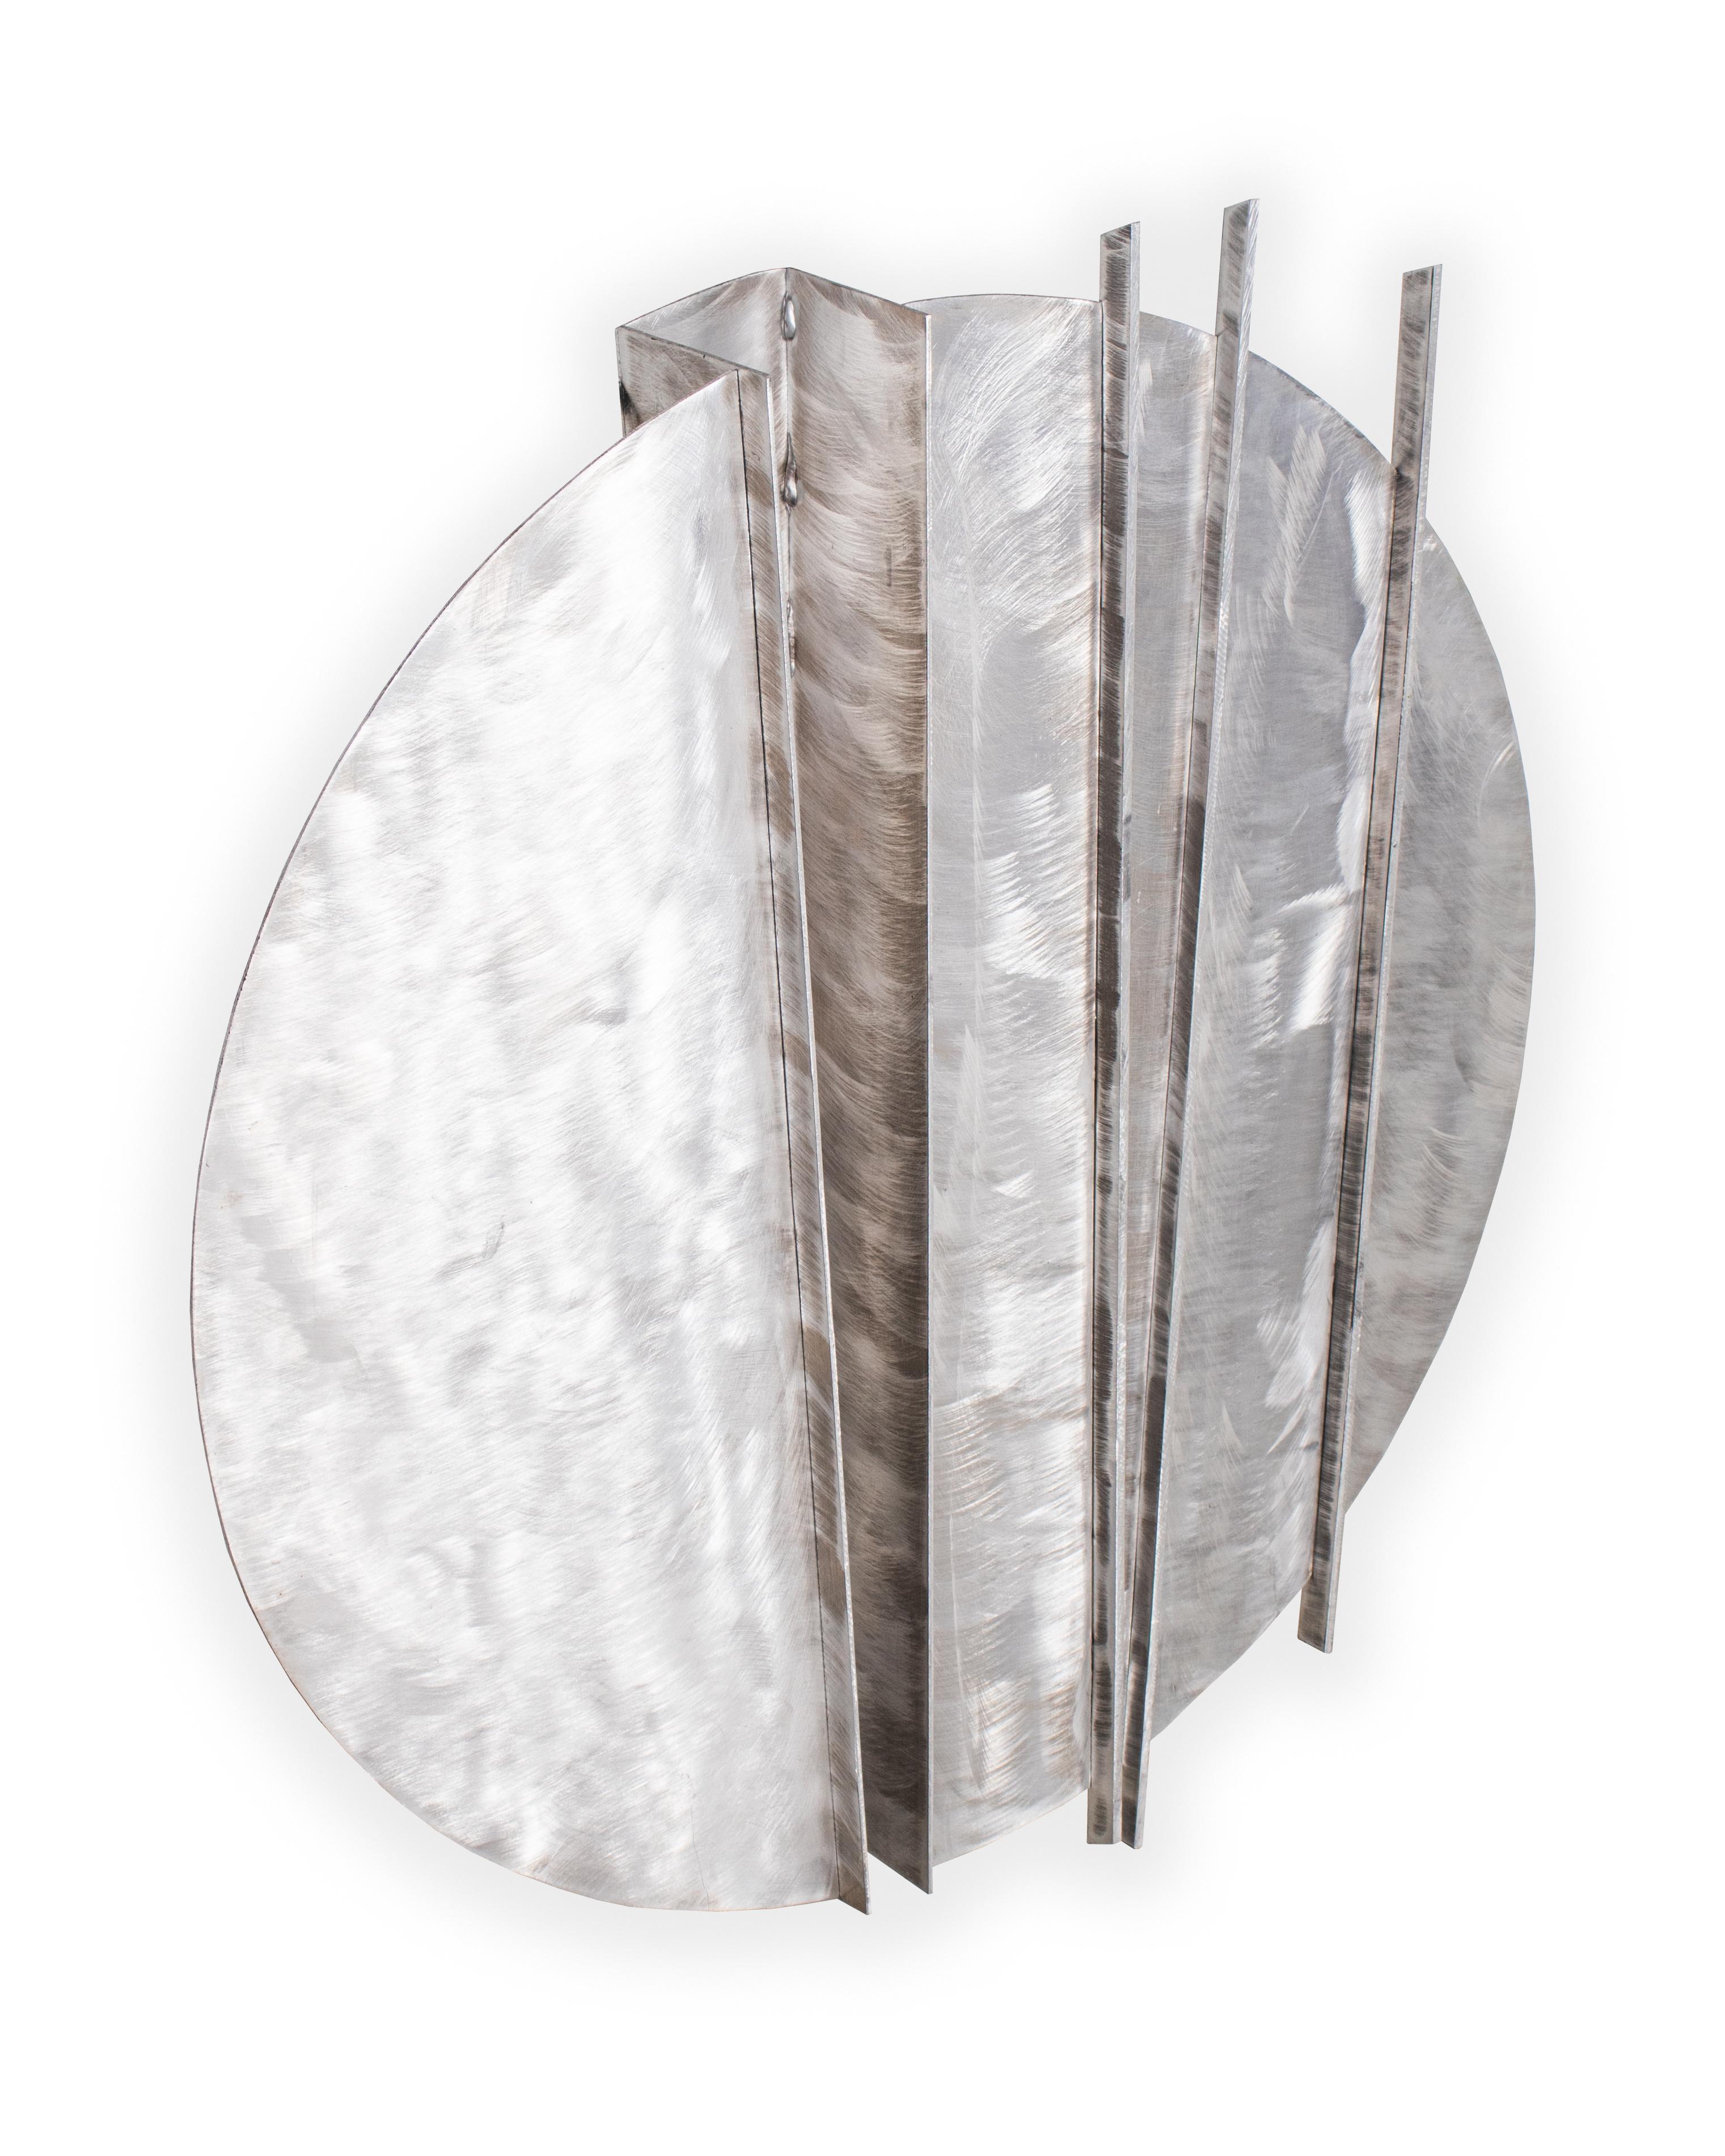 Central American Circular Stainless Steel Wall Art For Sale